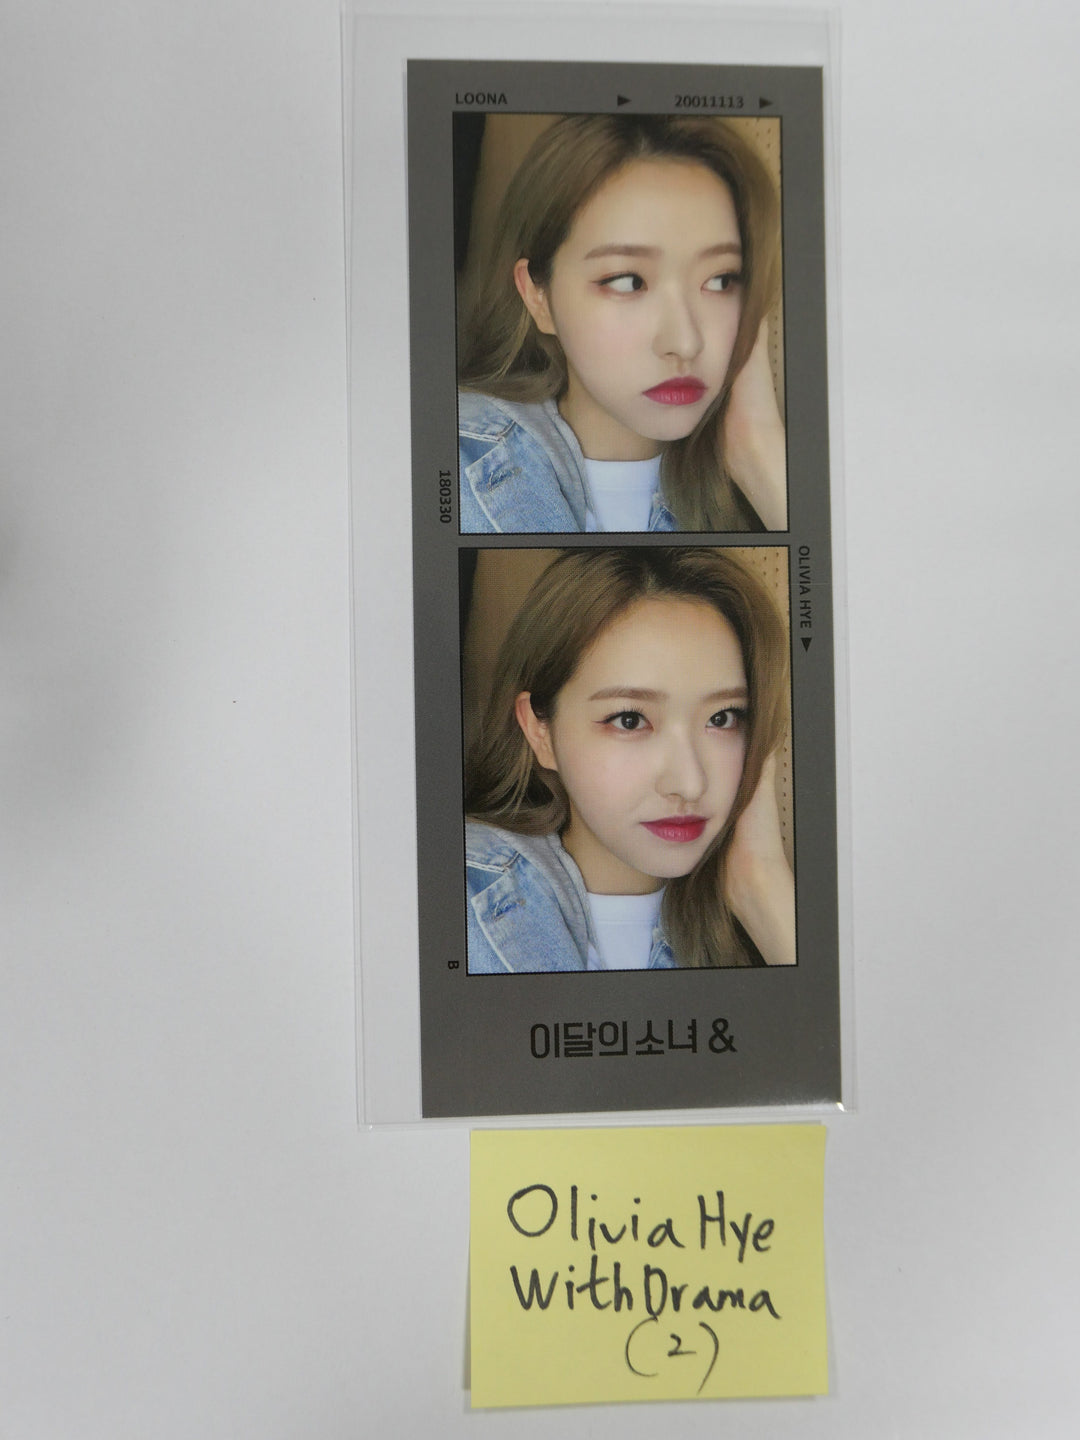 Loona '&' - Withdrama Fan Sign Event Two Cut Photocard - MUST READ!!!